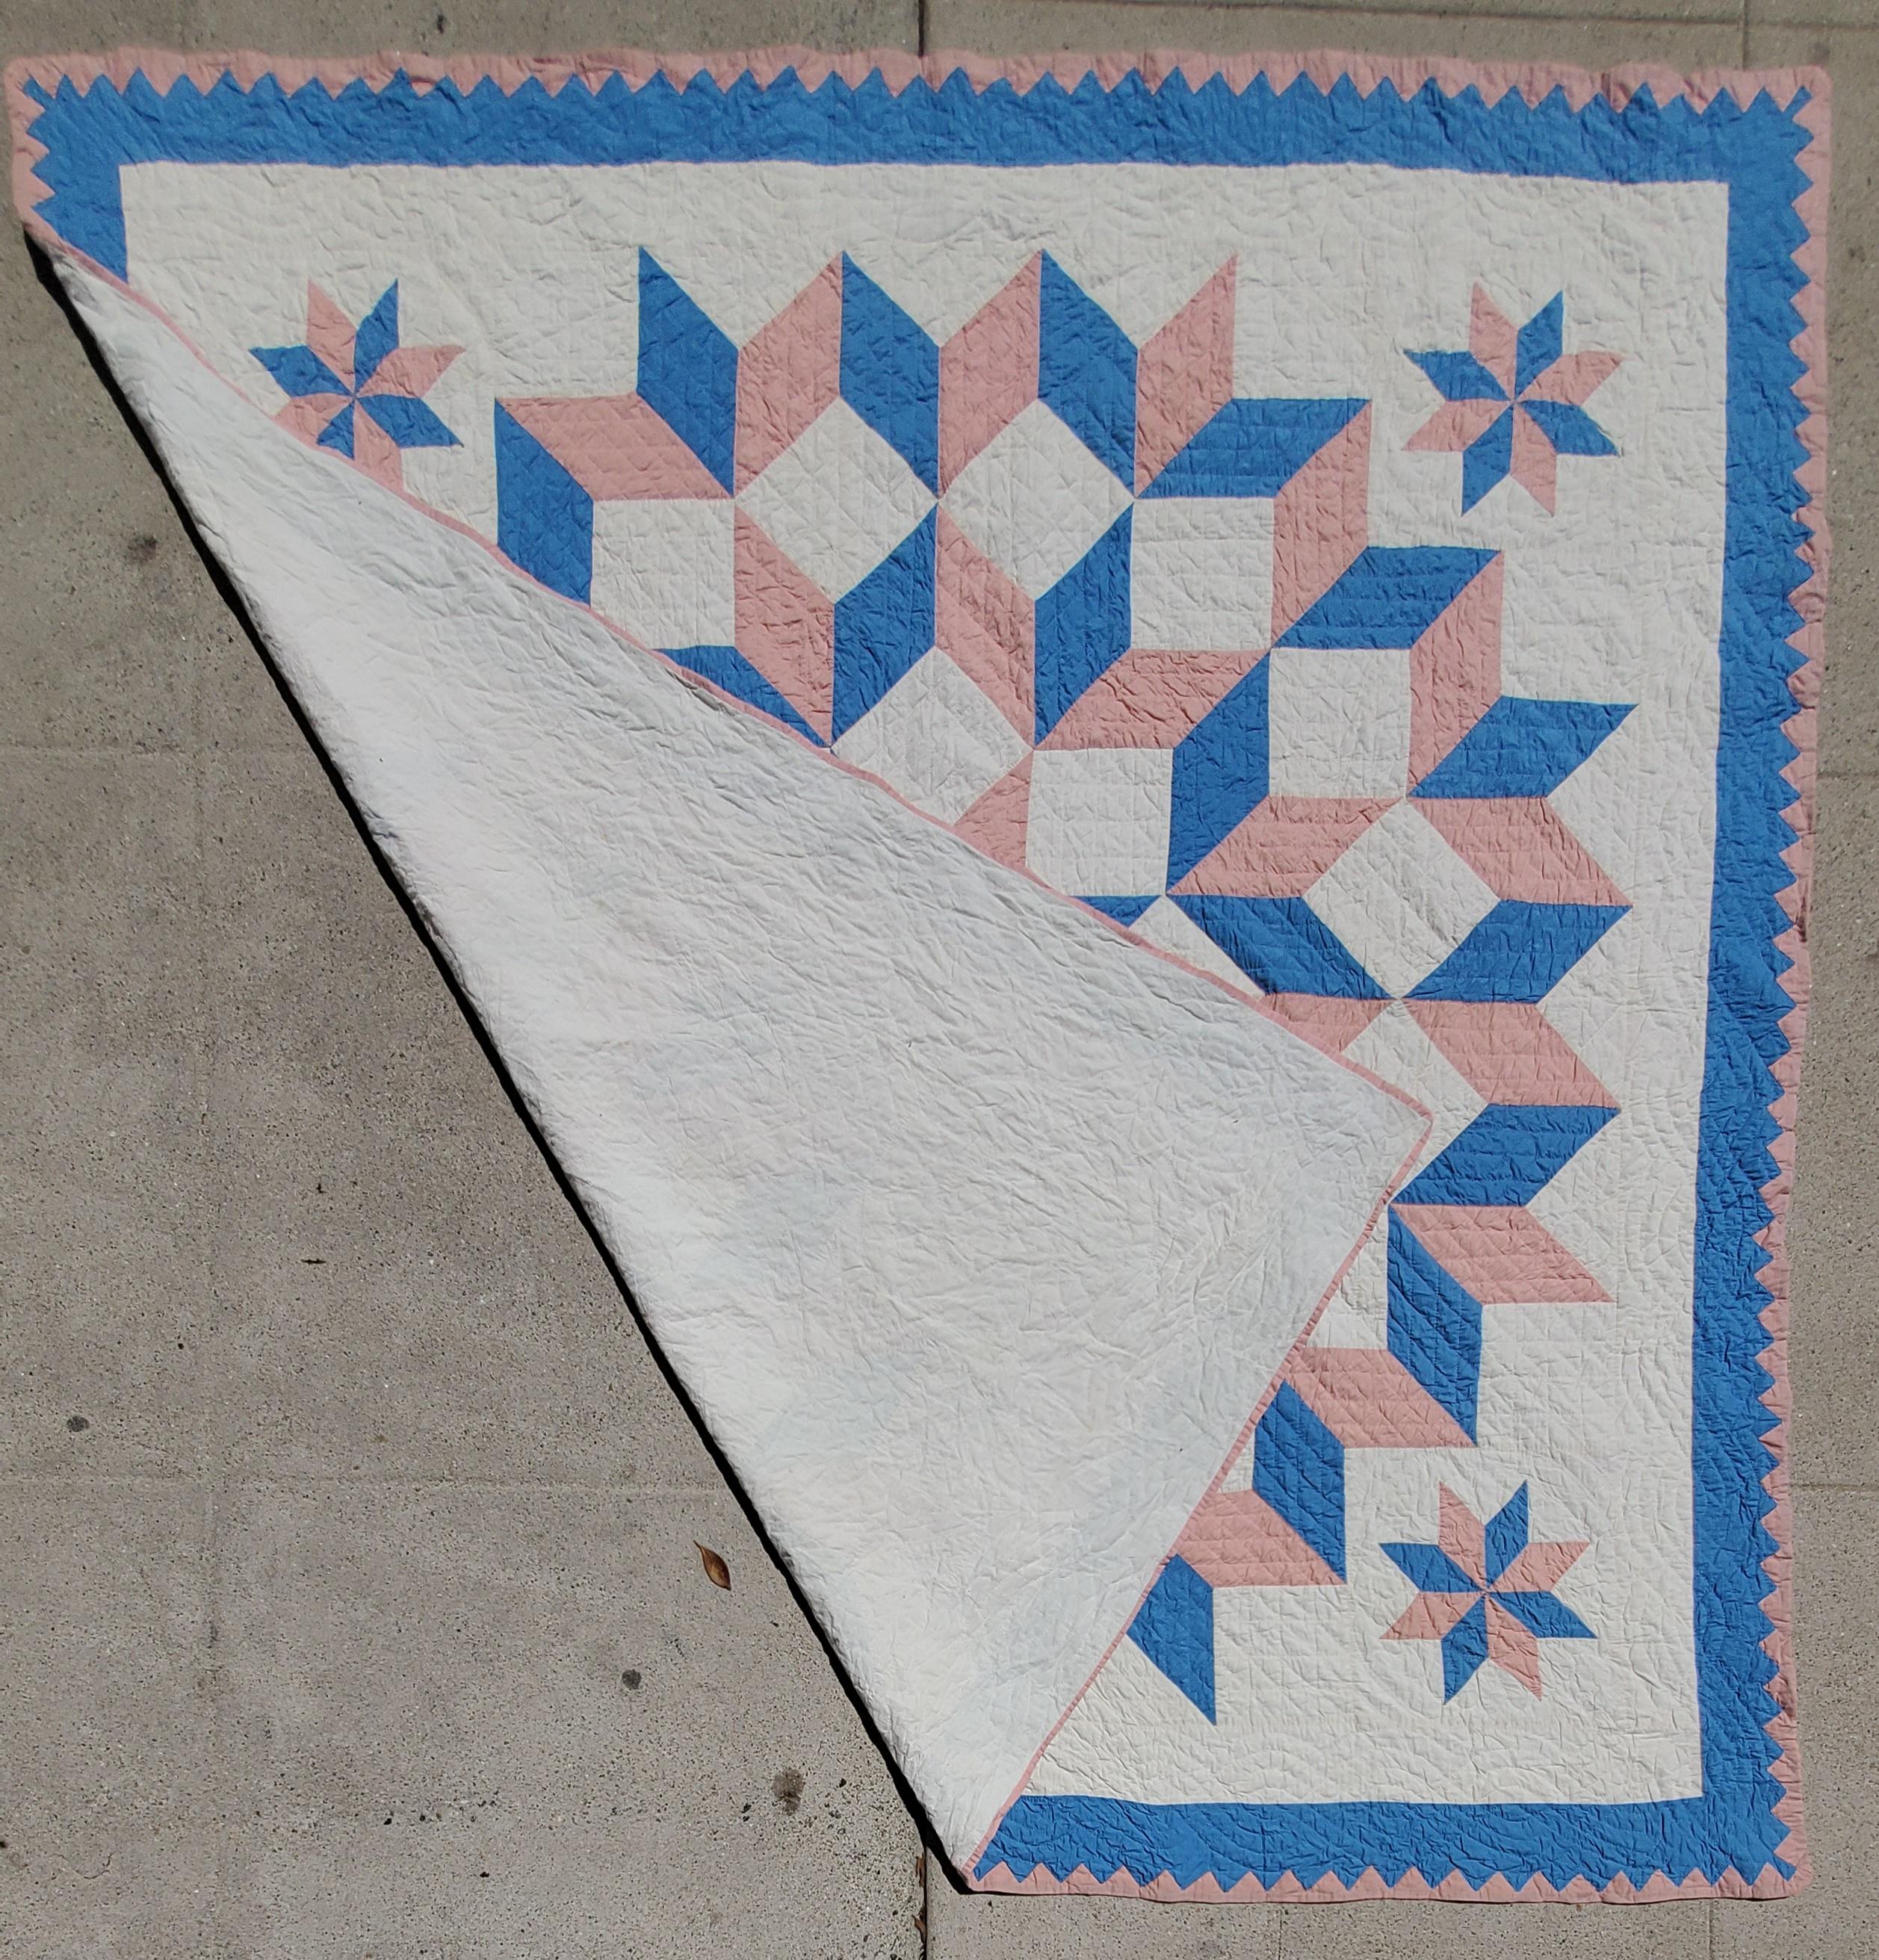 Ohio Amish blue & pink broken star quilt in pristine condition. Very fine quilting and piece work. Notice the fine hand stitched saw tooth binding.